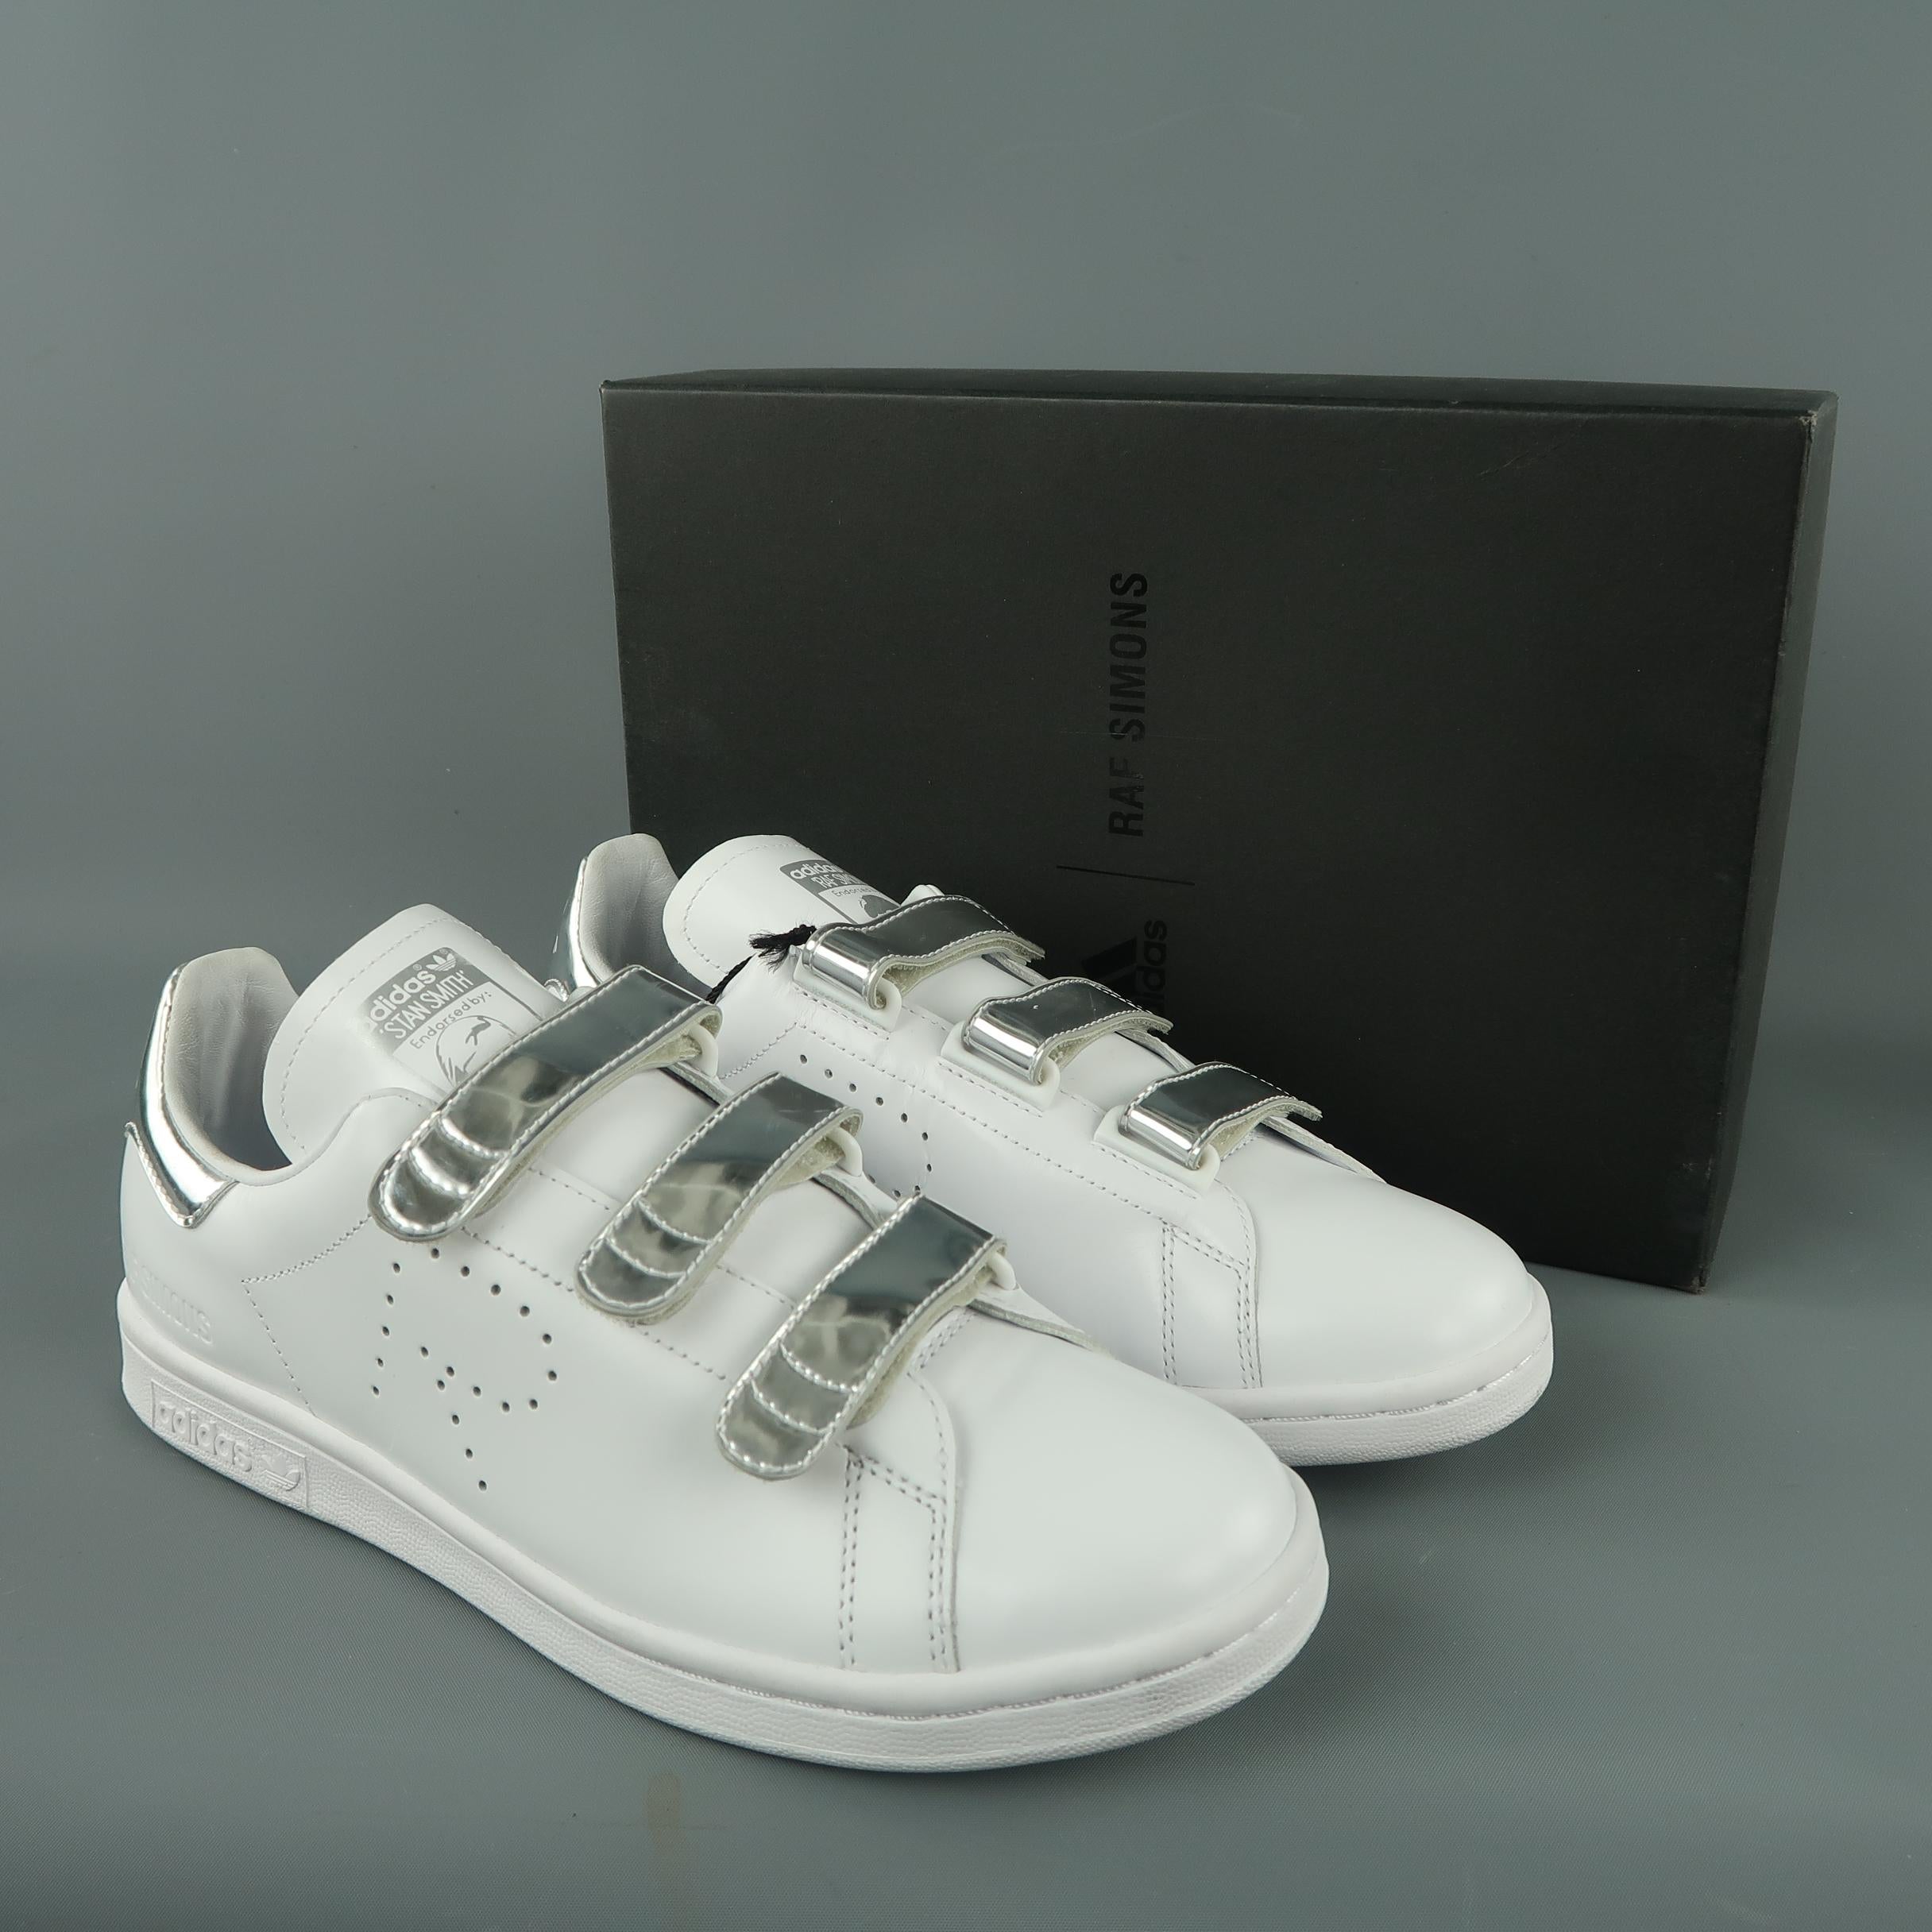 ADIDAS X RAF SIMONS Size 8.5 White Solid Leather Sneakers 6